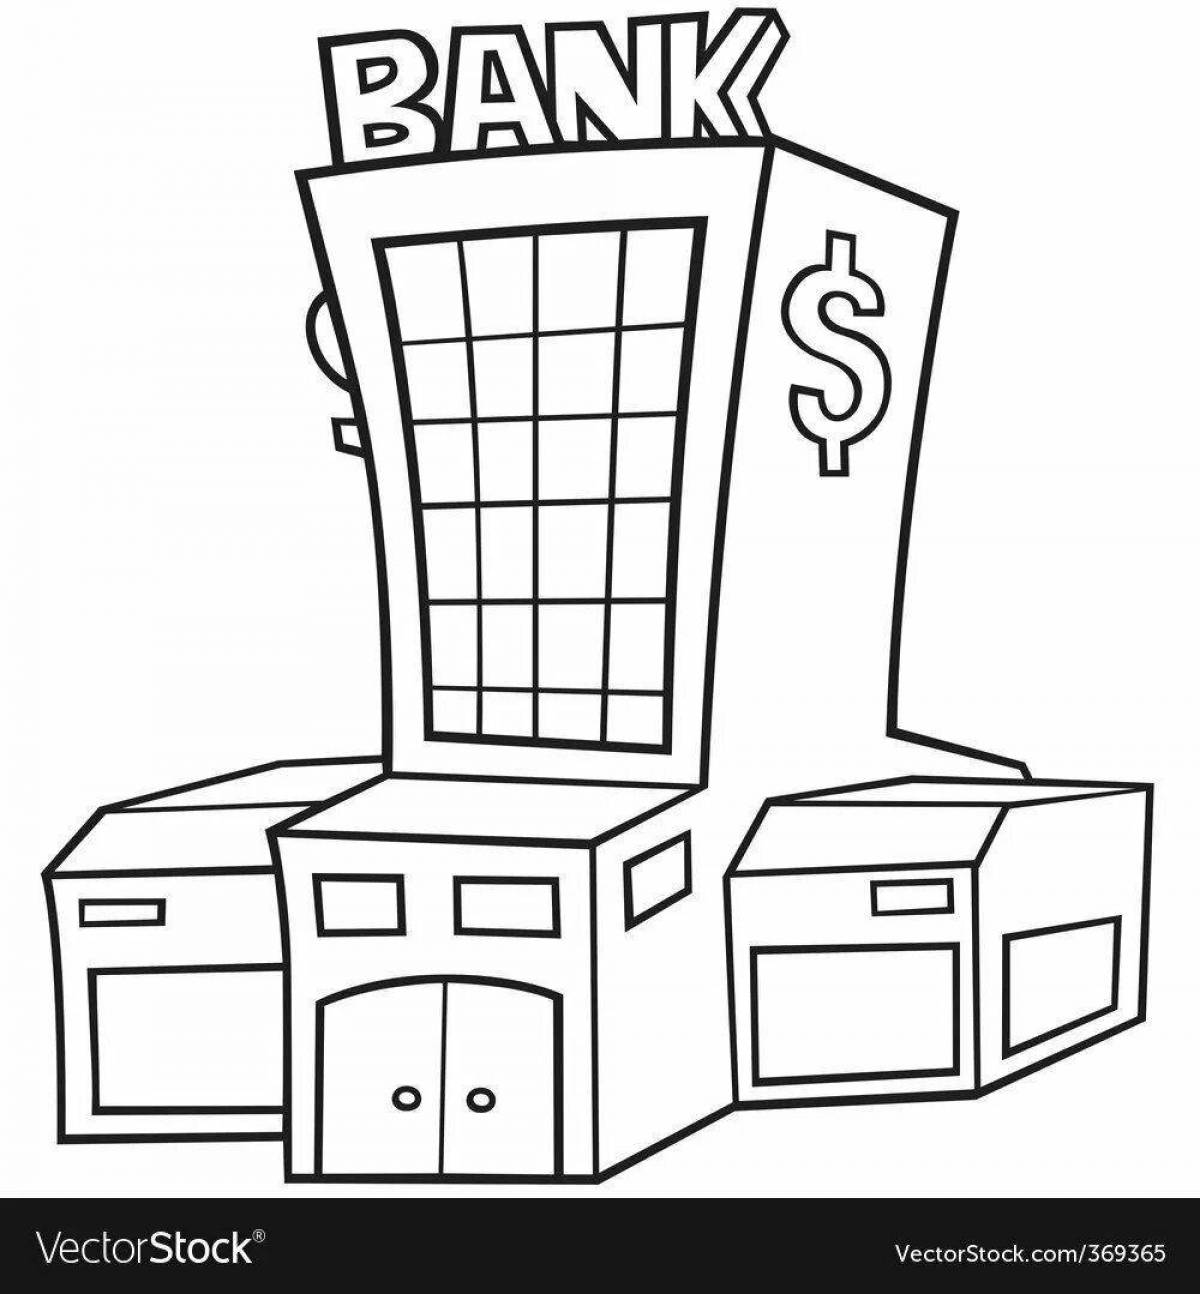 Coloring page mysterious bank robbery